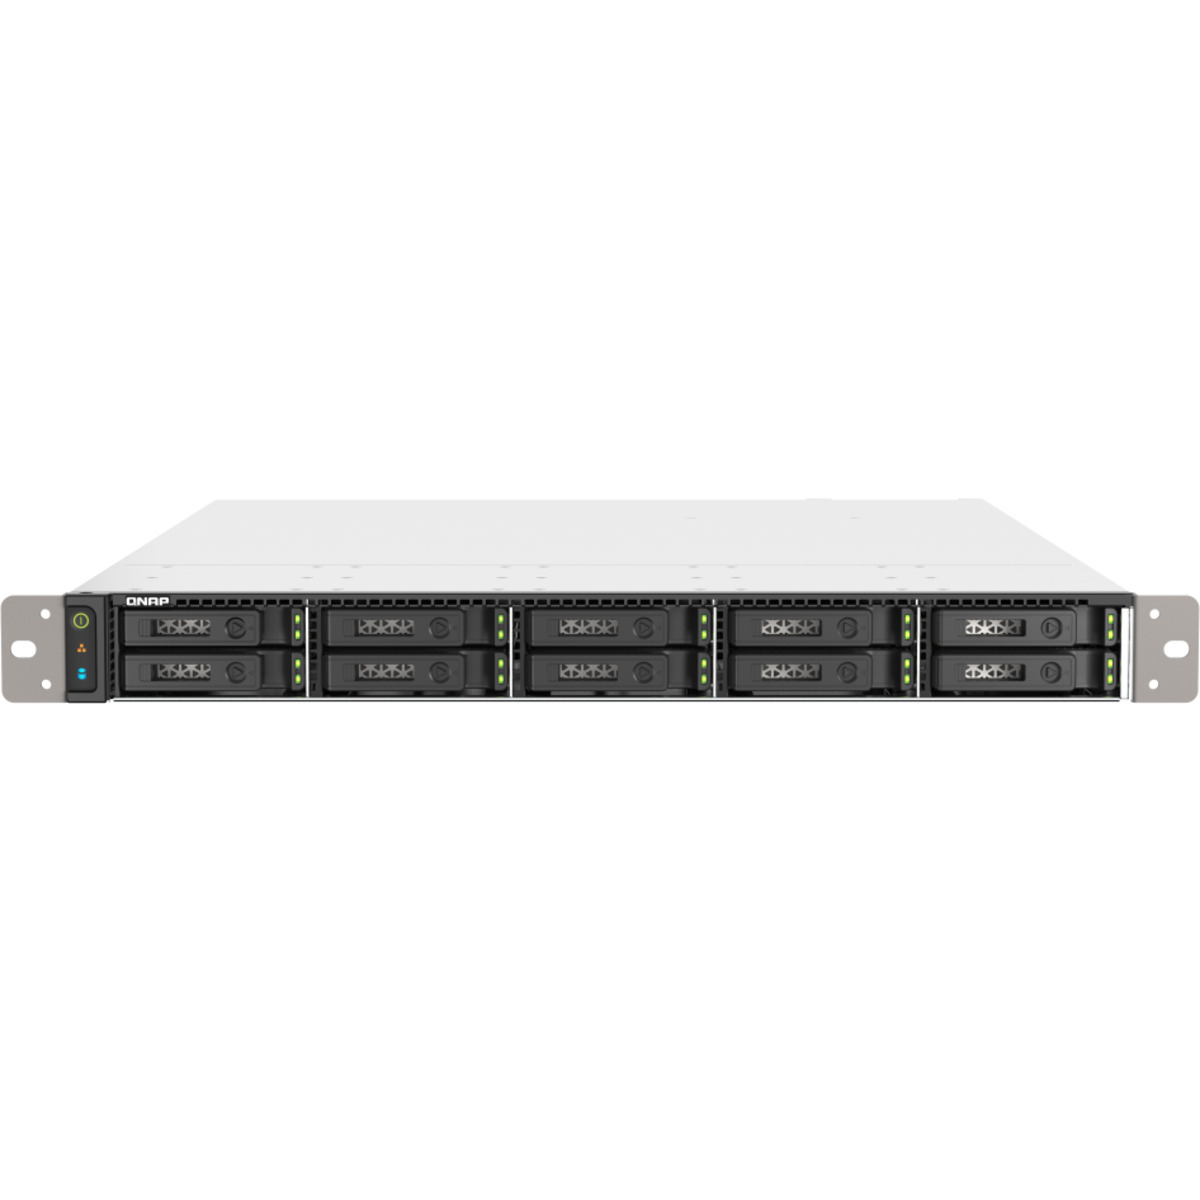 QNAP TS-h1090FU-7232P 2tb 10-Bay RackMount Large Business / Enterprise NAS - Network Attached Storage Device 8x250gb Western Digital Red SN700 WDS250G1R0C  3100/1600MB/s M.2 2280 NVMe SSD NAS Class Drives Installed - Burn-In Tested TS-h1090FU-7232P